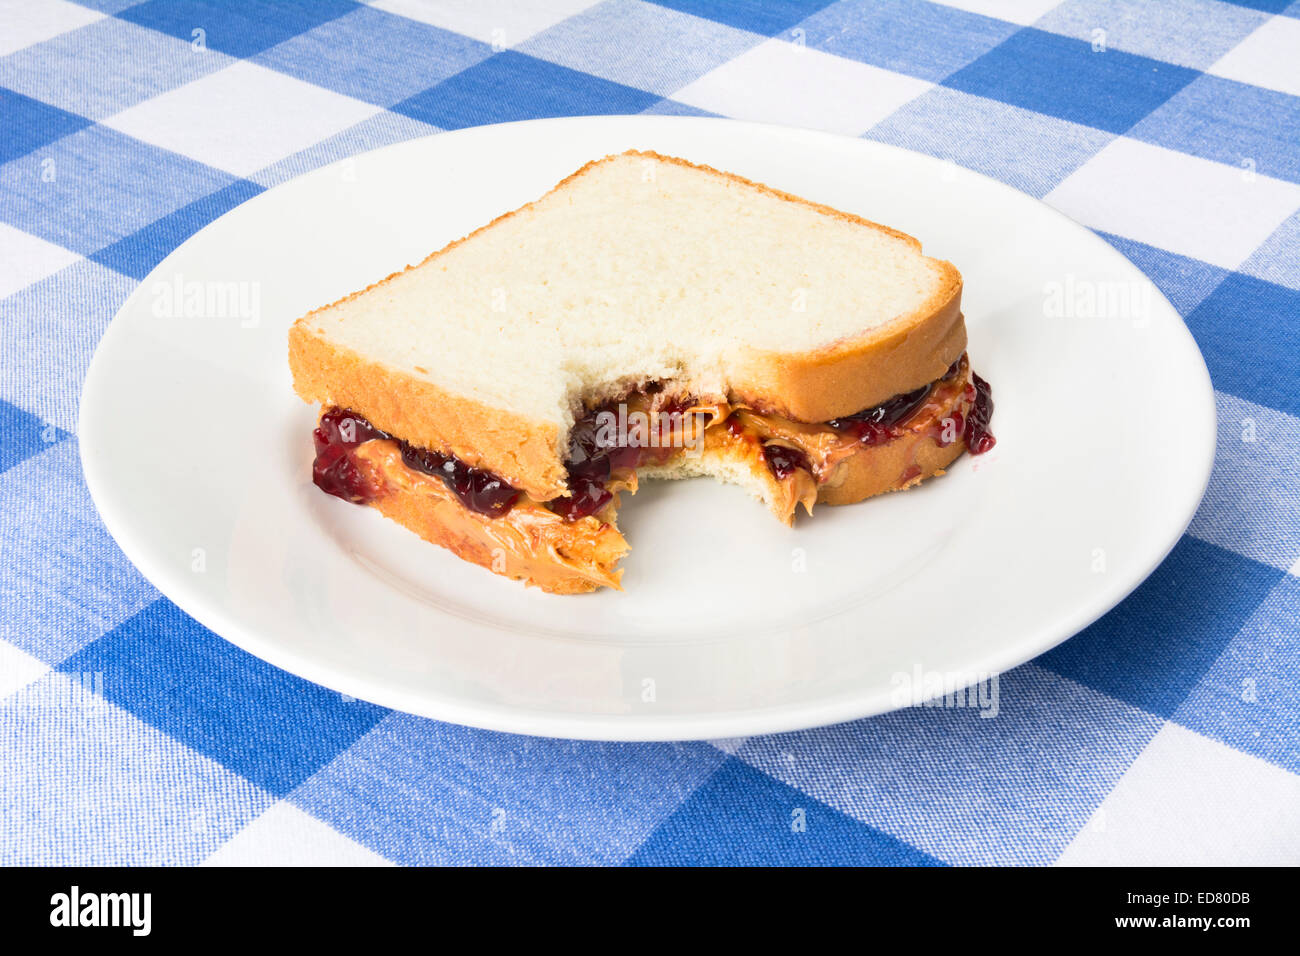 A delicious peanut butter and jelly sandwich with grape jam has a bite taken out of it during lunchtime. Stock Photo